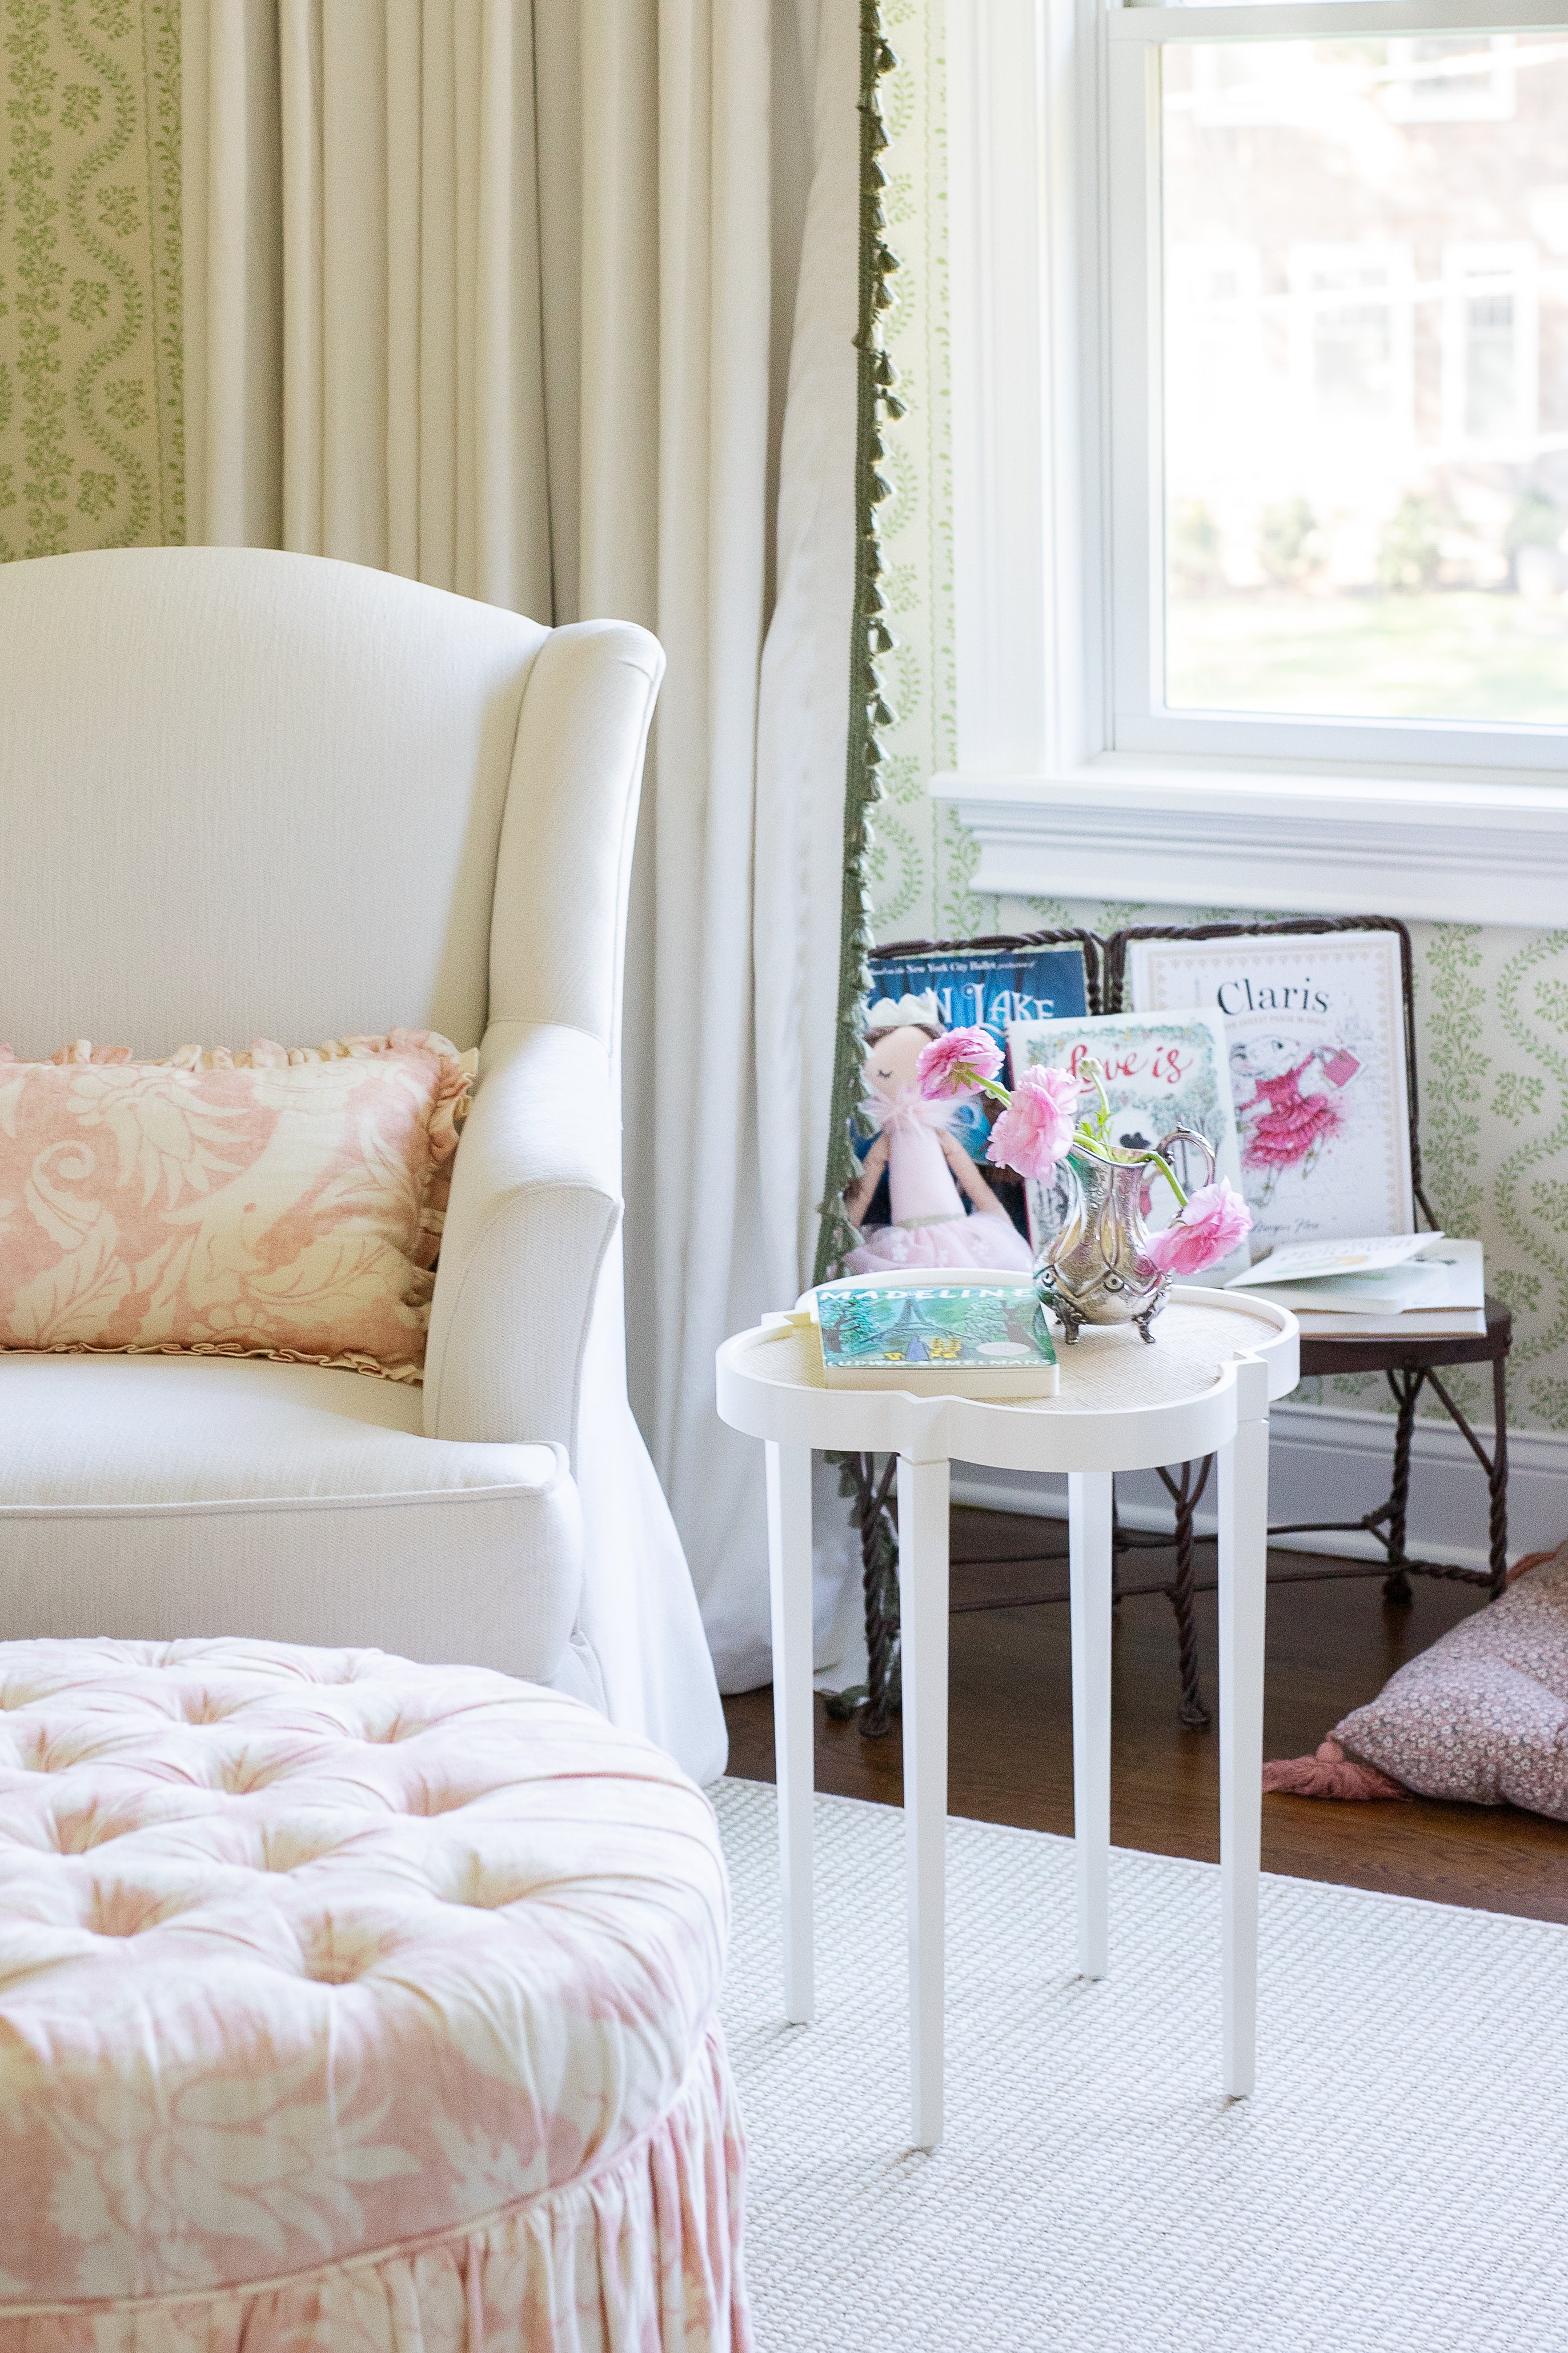 Natural white curtain with green tassel trim hanging behind a white stool and chair with a pink pillow on it